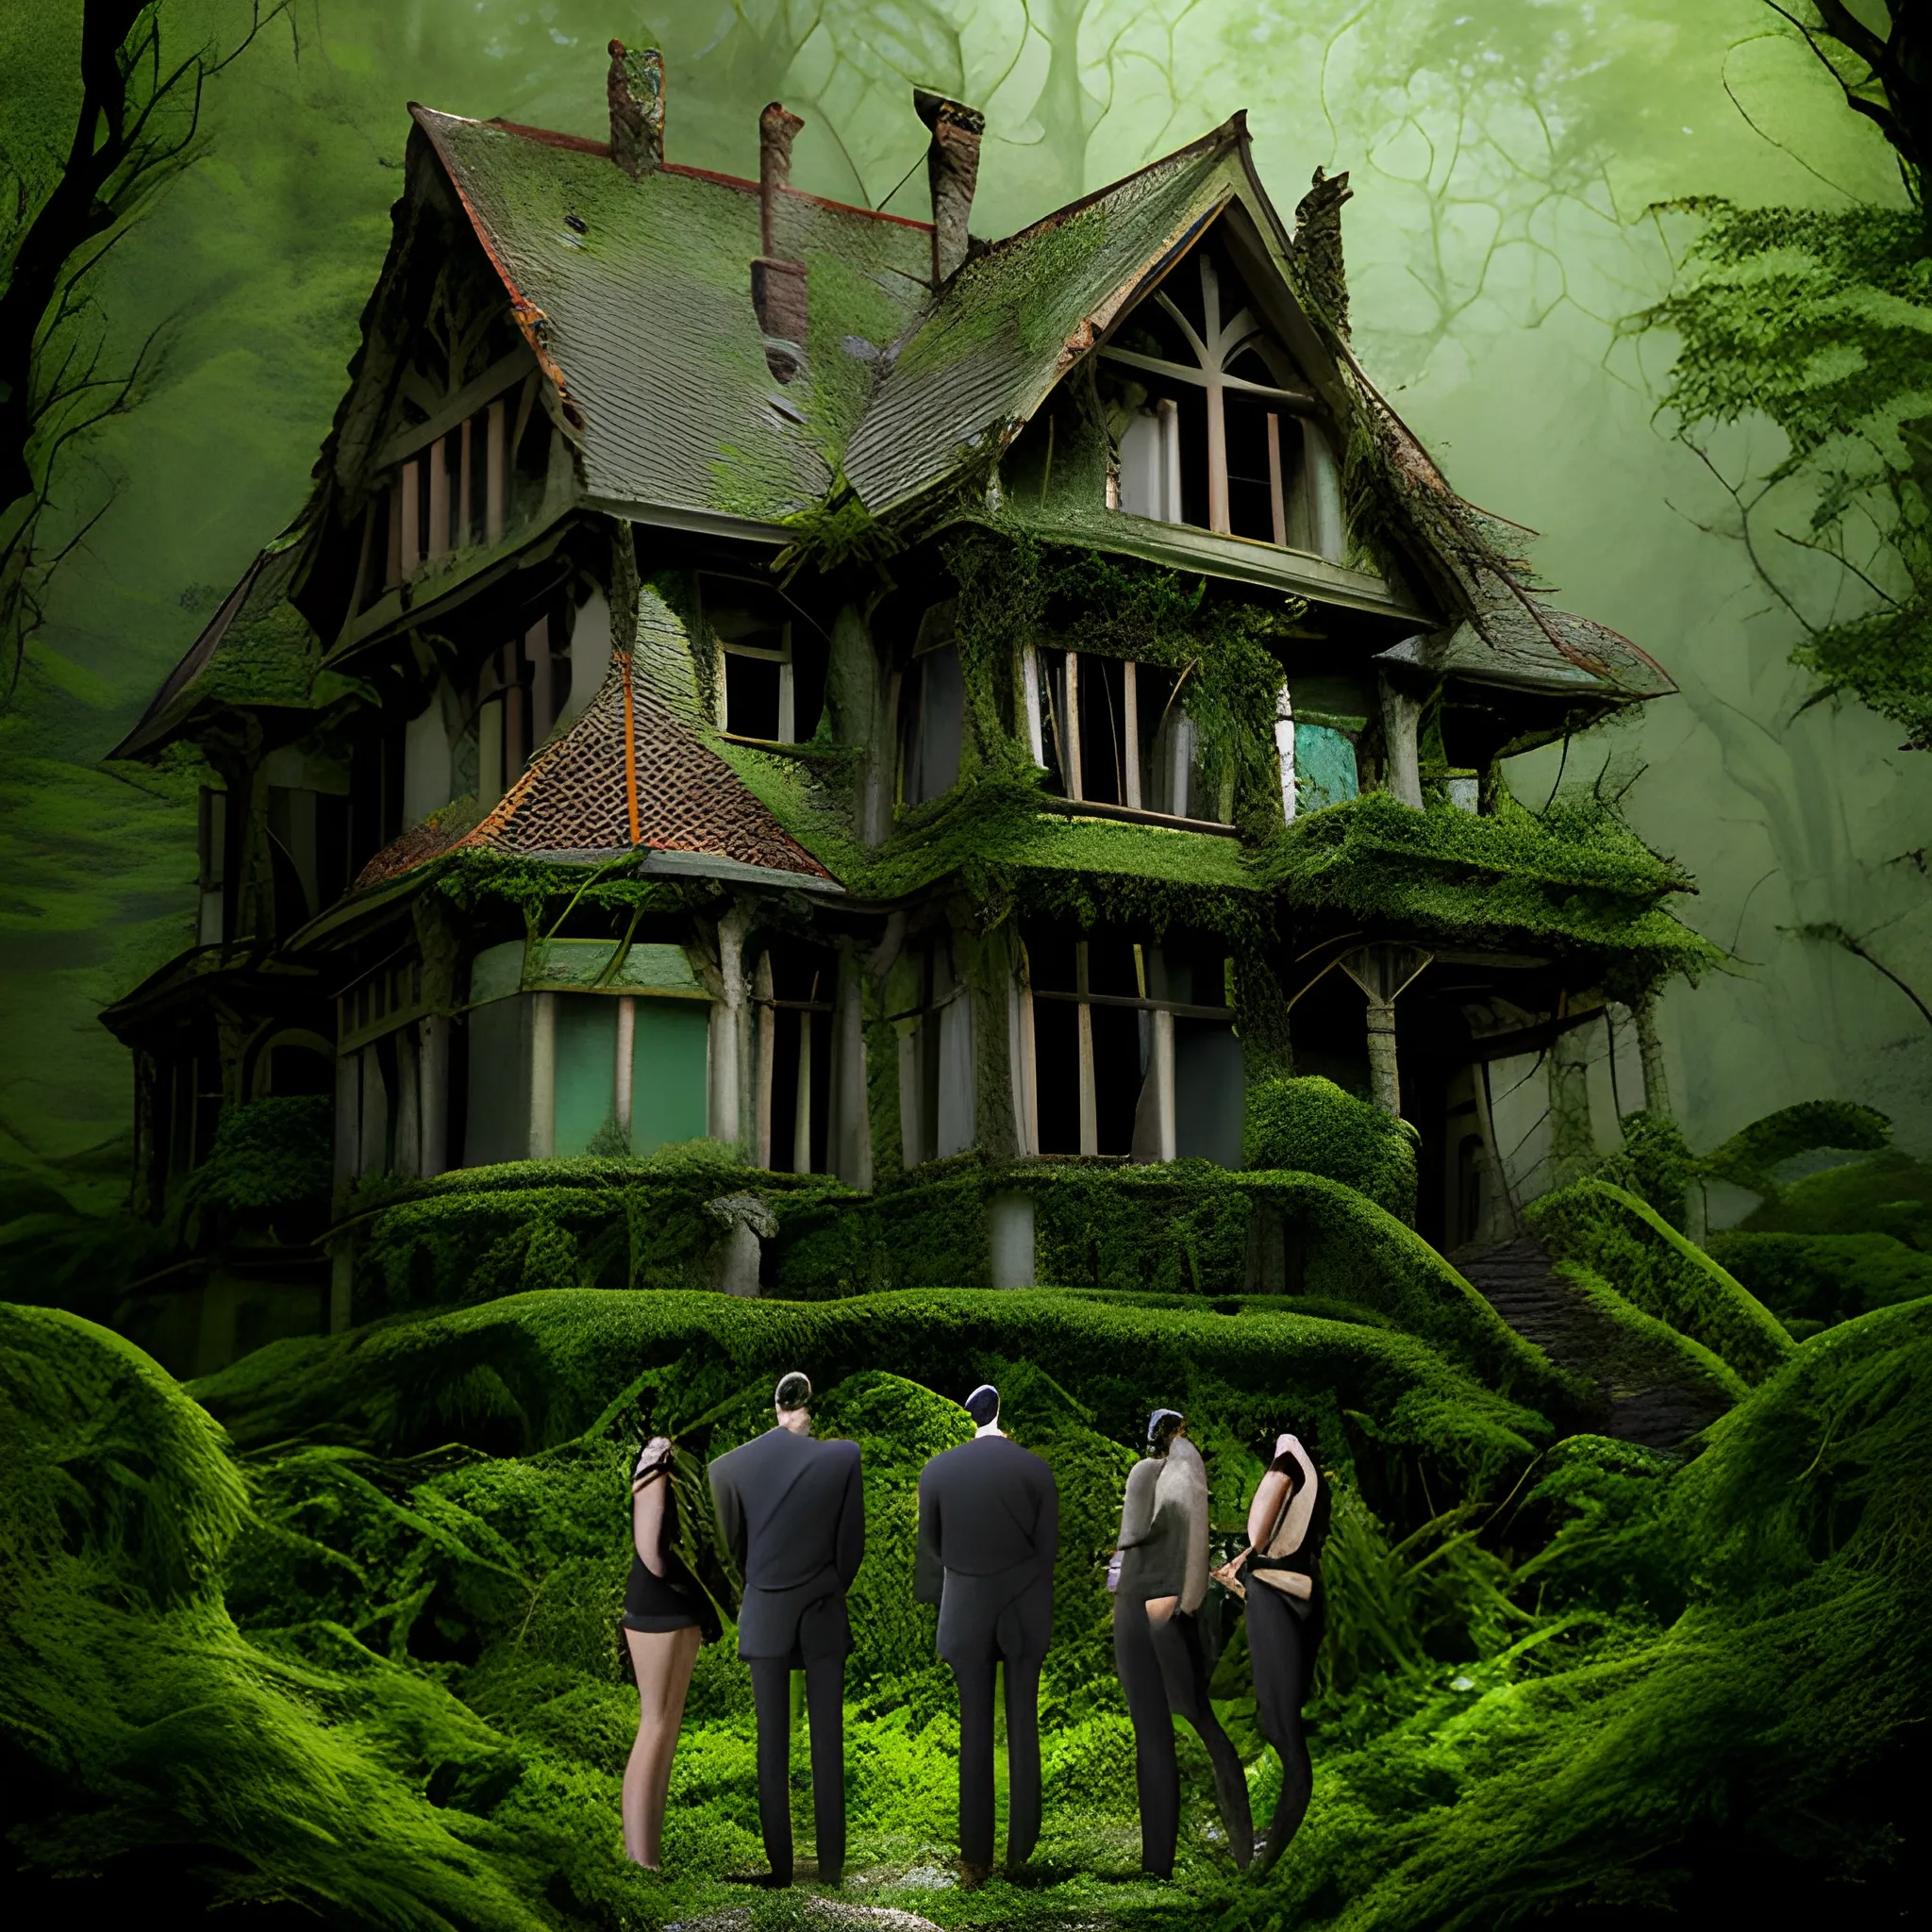 Description: Picture four children (two boys and two girls) standing at the edge of a dense forest. They should look intrigued and maybe a bit cautious as they observe an old, eerie house that seems to have appeared among the trees. The house should look dilapidated, with broken windows and ivy creeping up its walls.